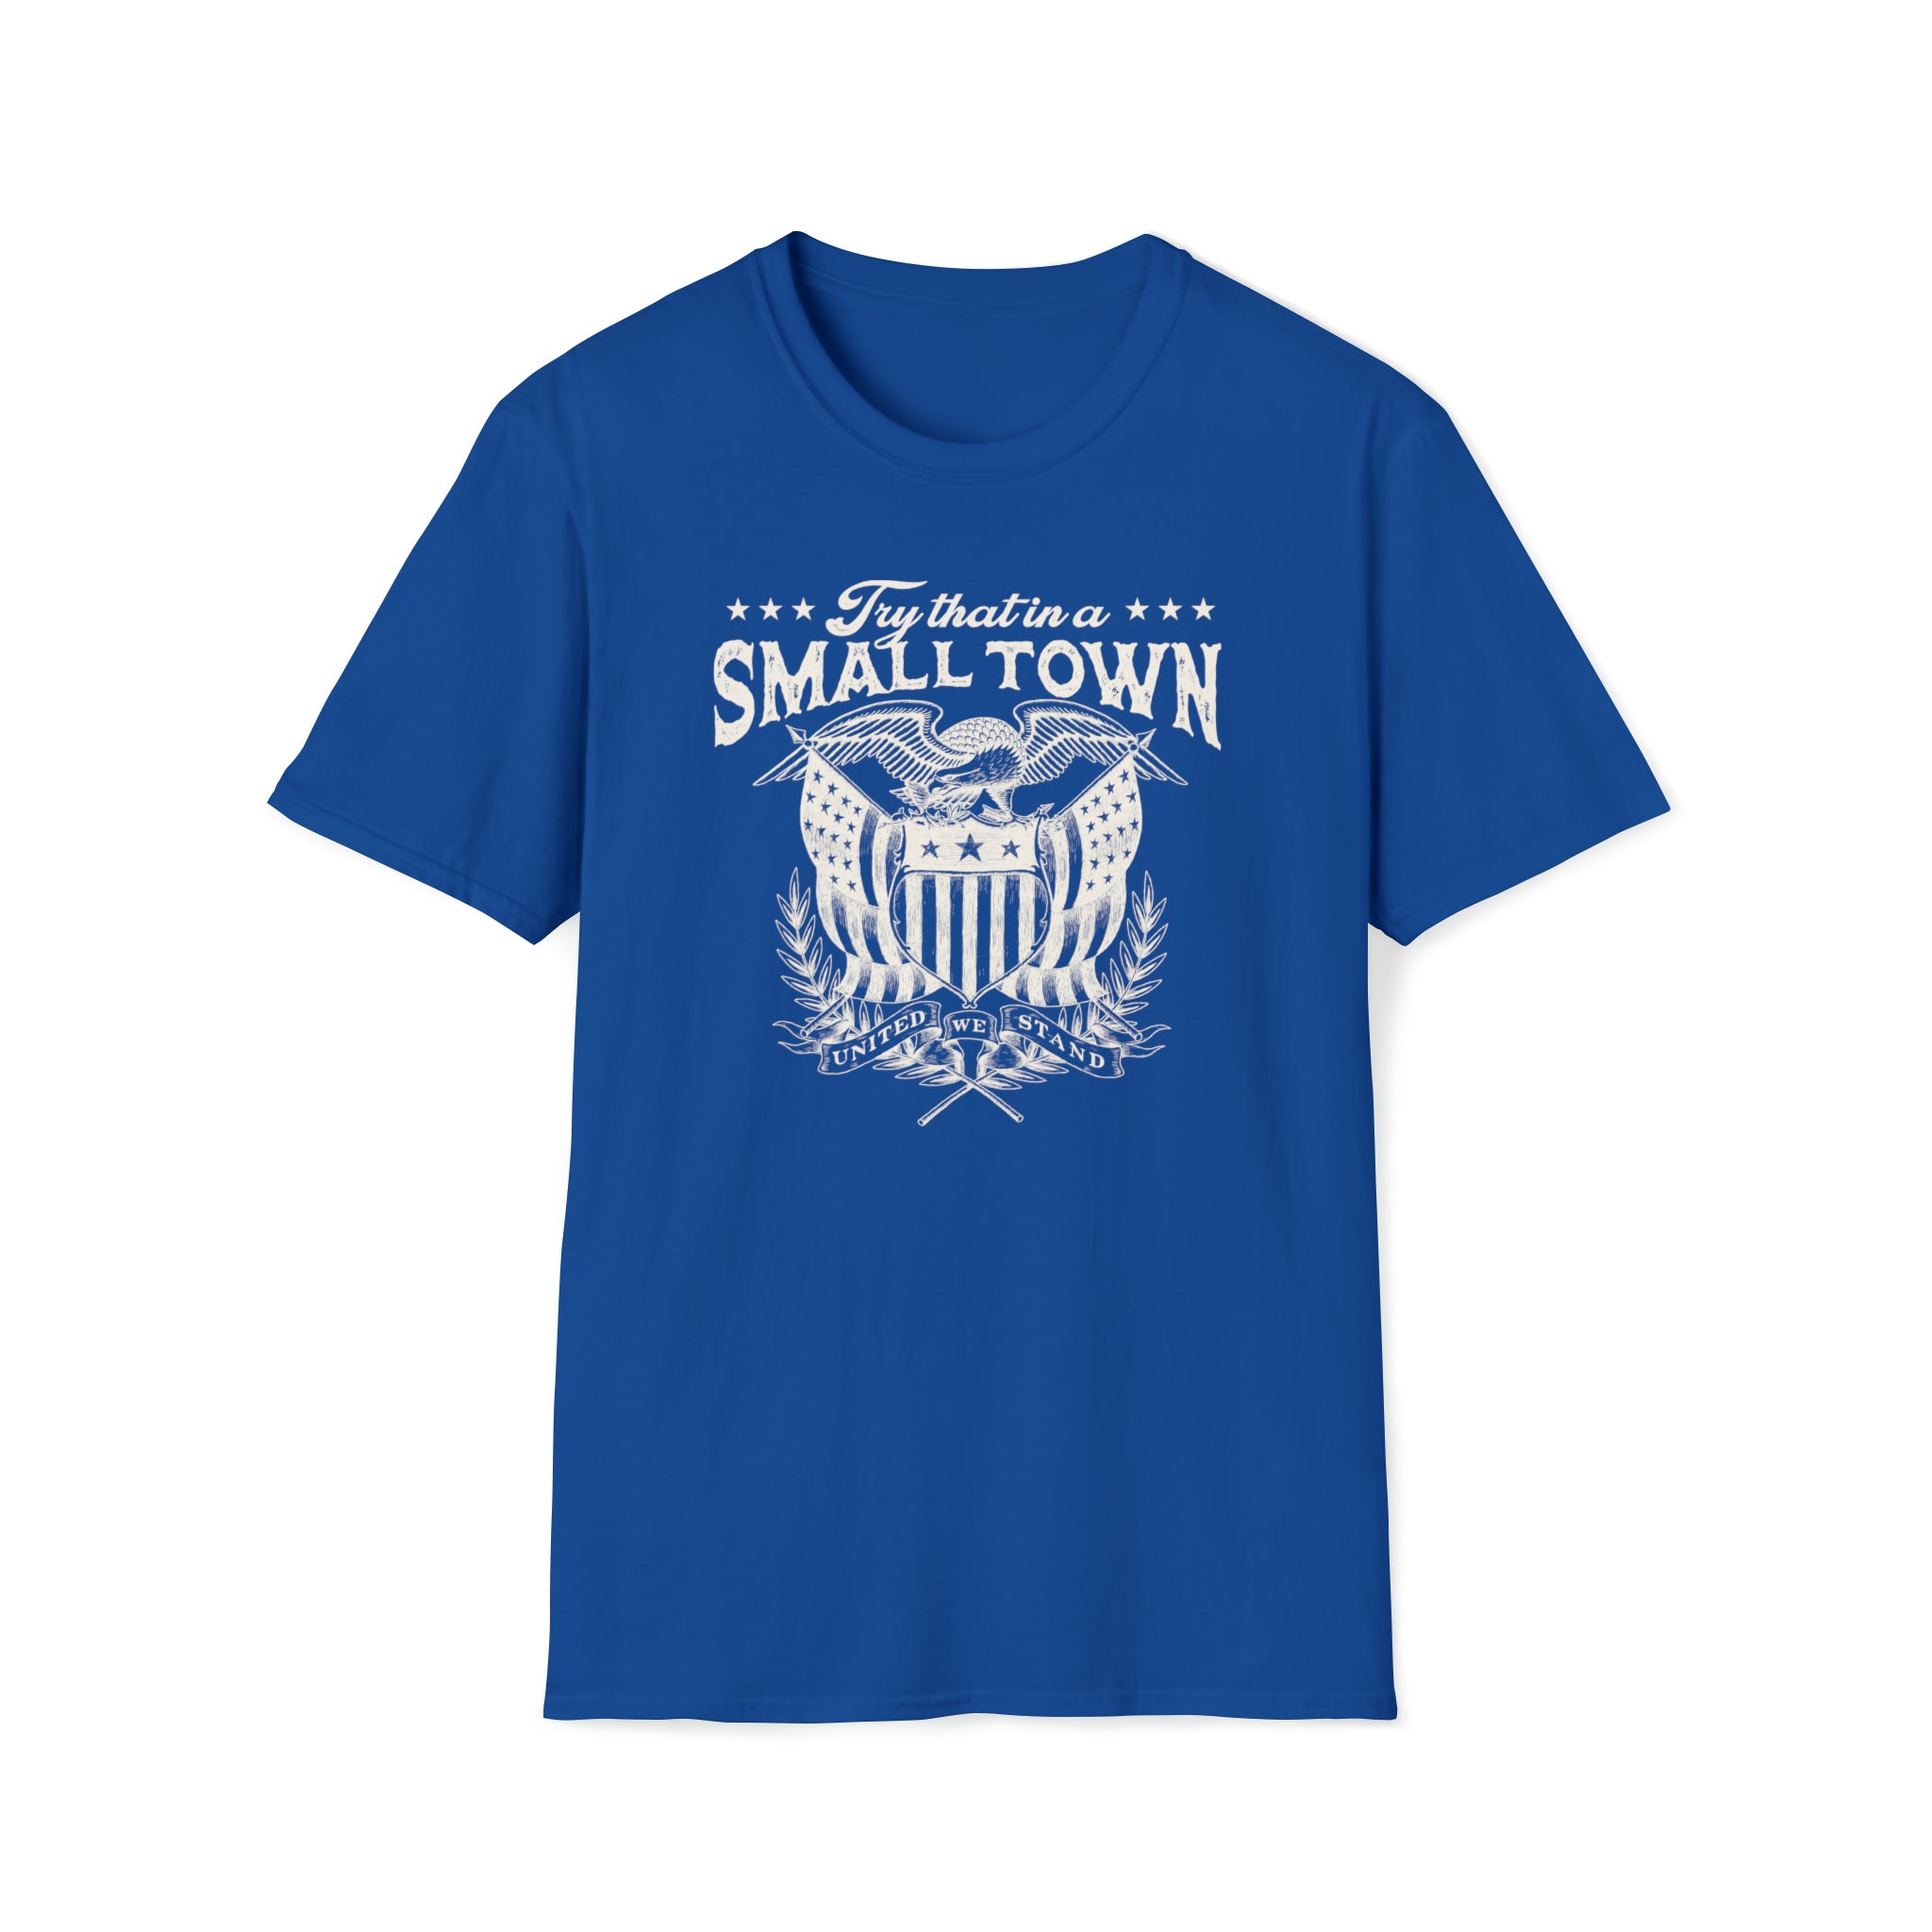 Try That In A Small Town - Vintage Shield Tee